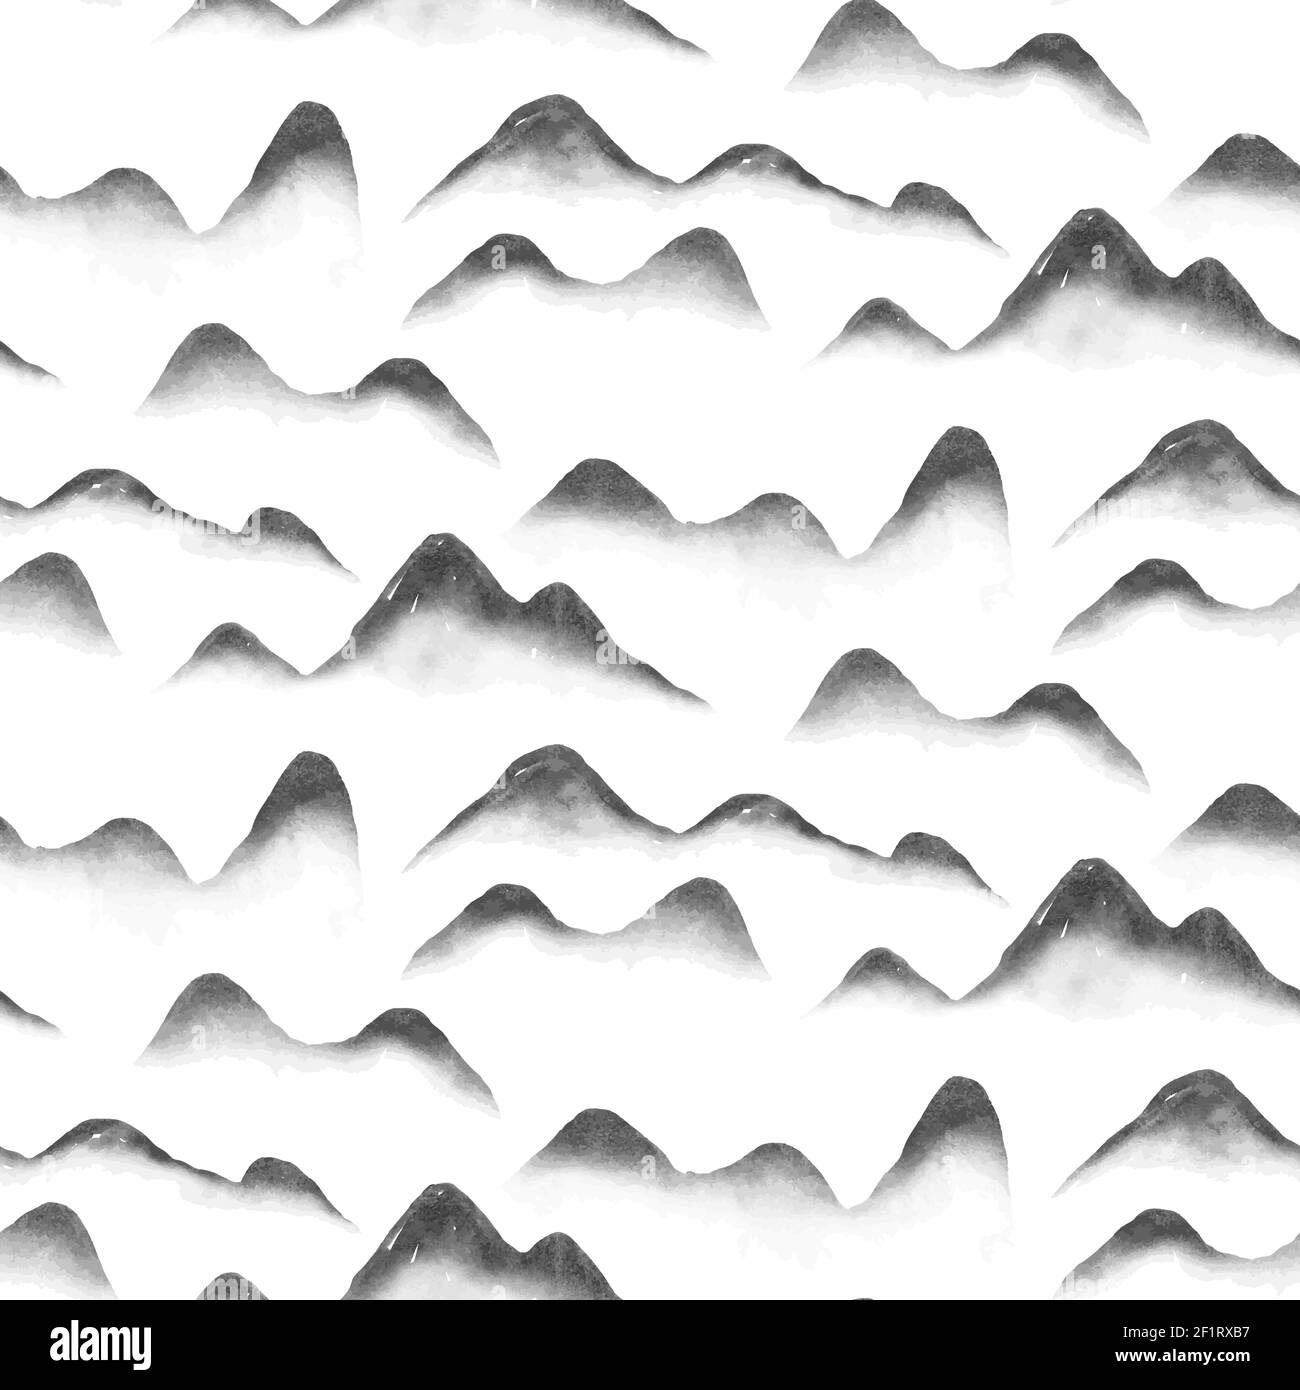 Minimalist chinese art mountain seamless pattern. Traditional sumi-e ink brush style landscape background for asian culture event or celebration. Stock Vector